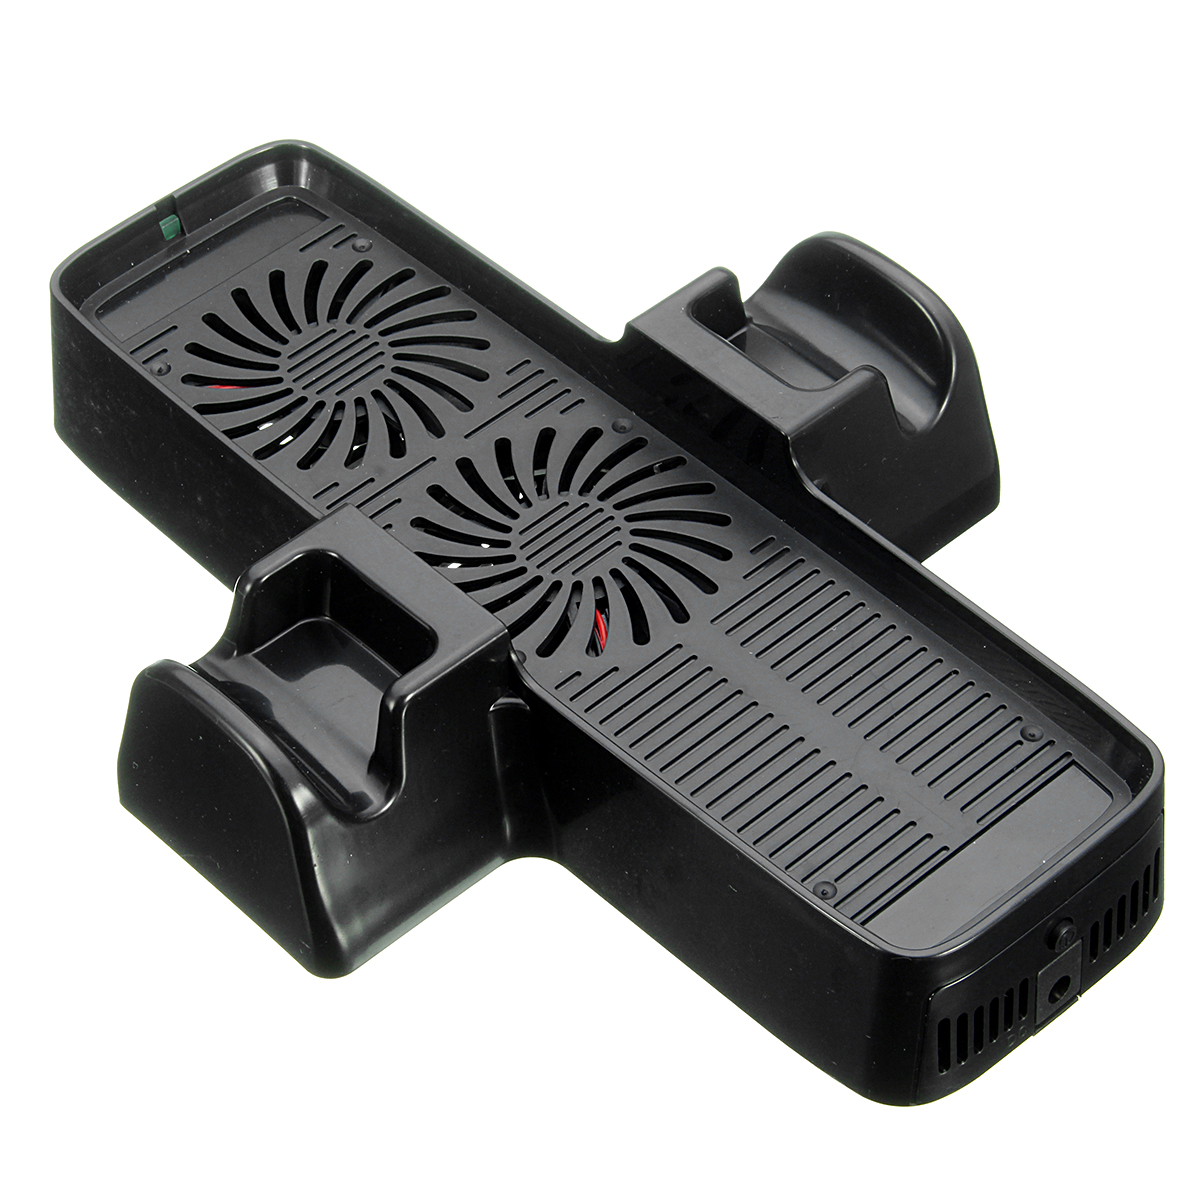 

Multifunction 3 in 1 Vertical Charging Dock Station Cooling Fan Stand For Xbox 360